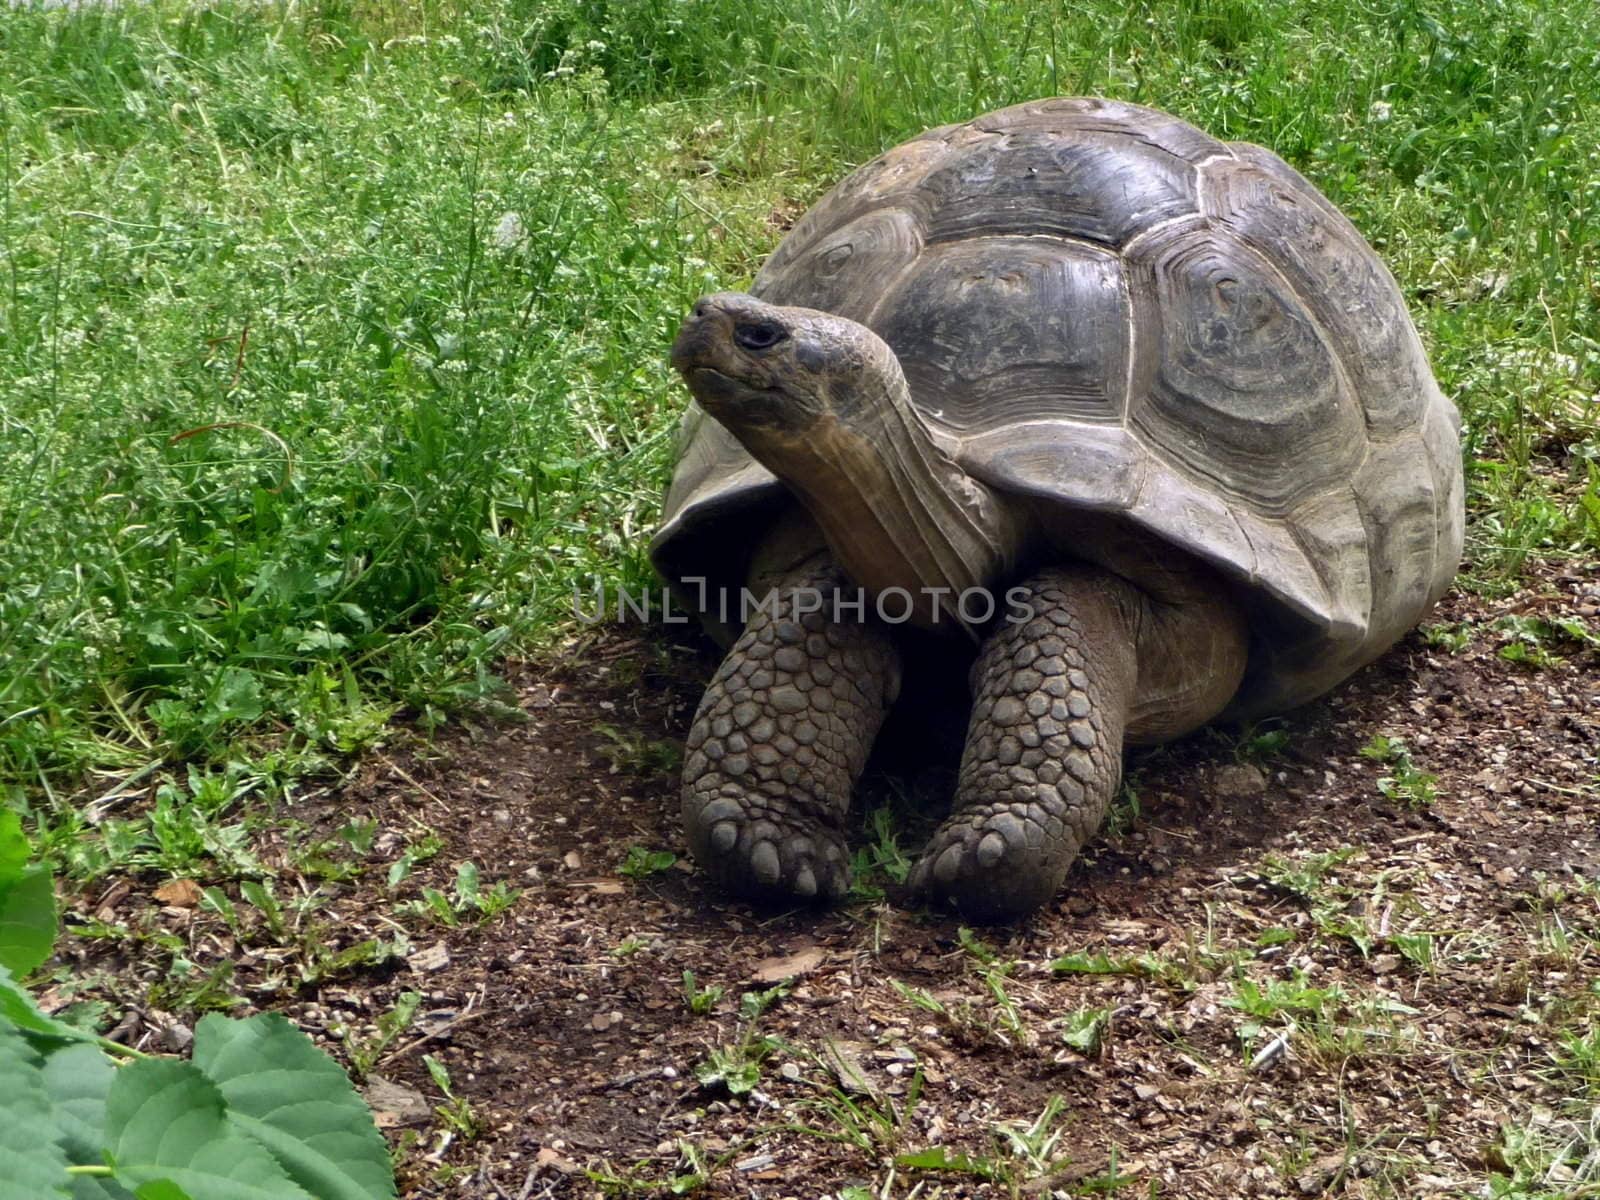 Old large turtle sits on the grass ground